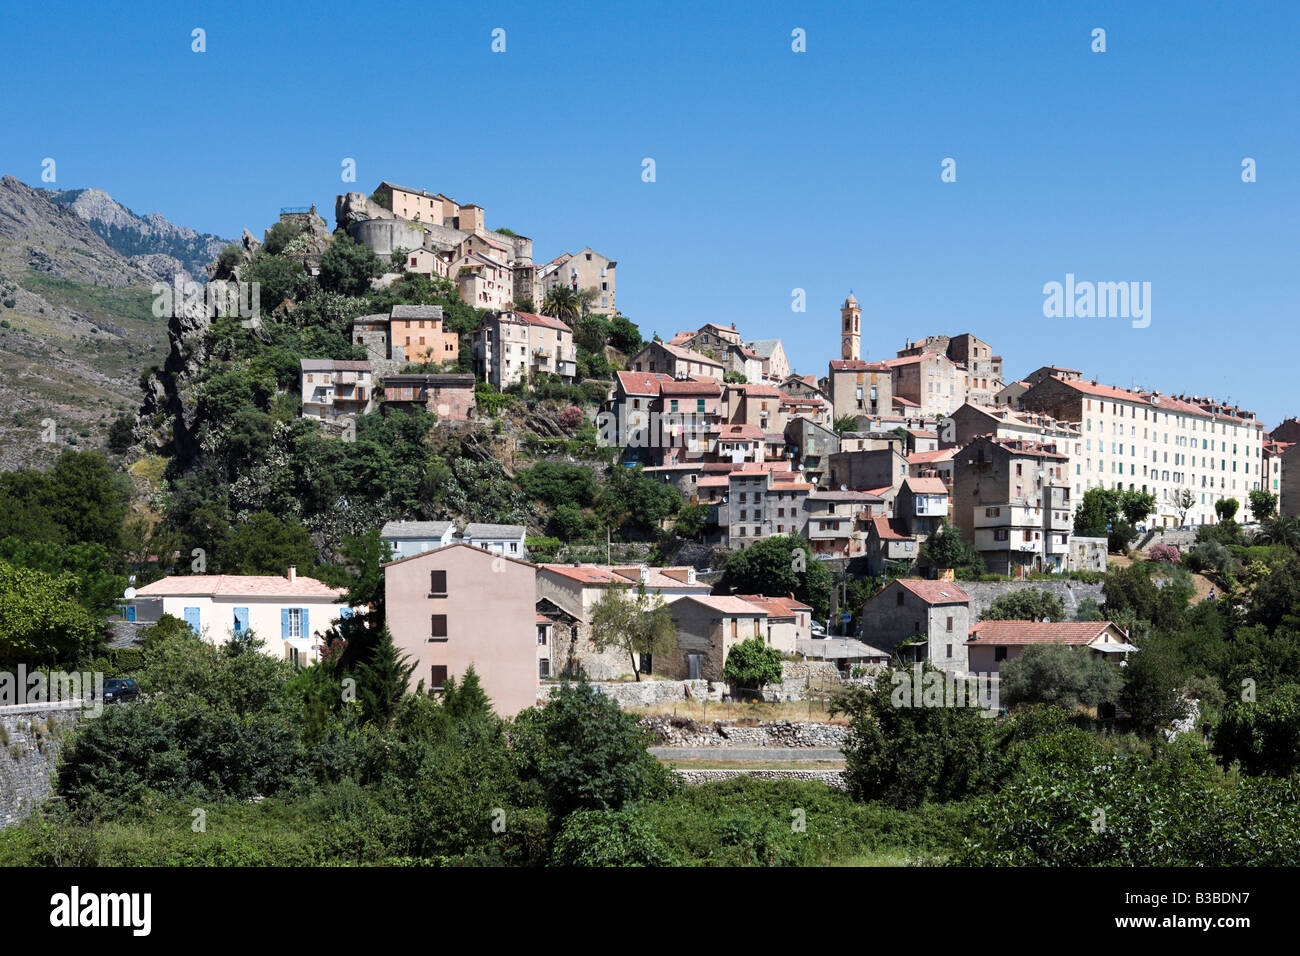 View of the haute ville (old town) and citadelle, Corte (former capital of independent Corsica), Central Corsica, France Stock Photo